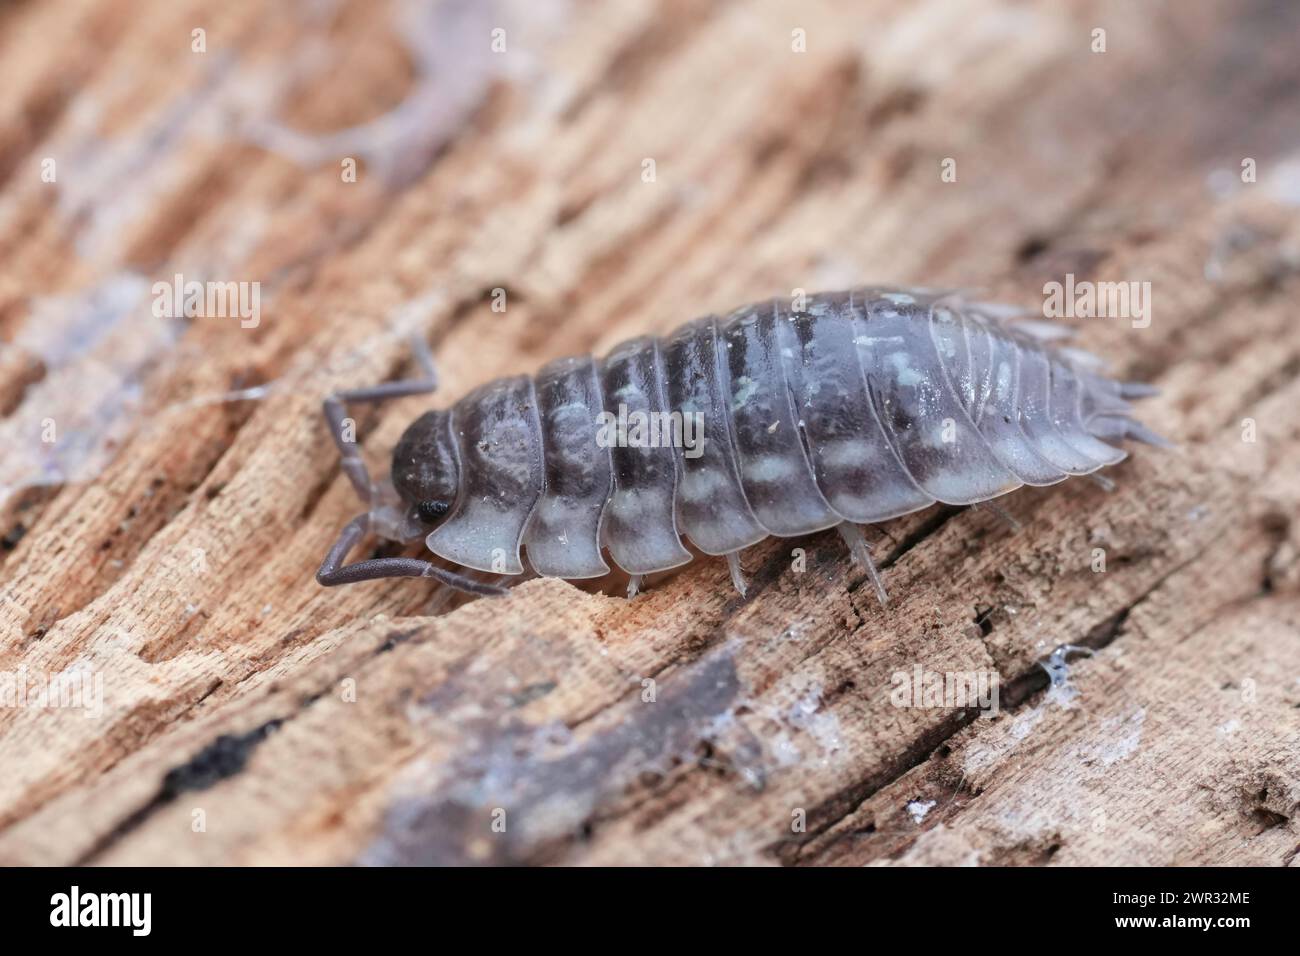 Natural closeup on a common shiny woodlouse, Oniscus asellus sitting on wood Stock Photo